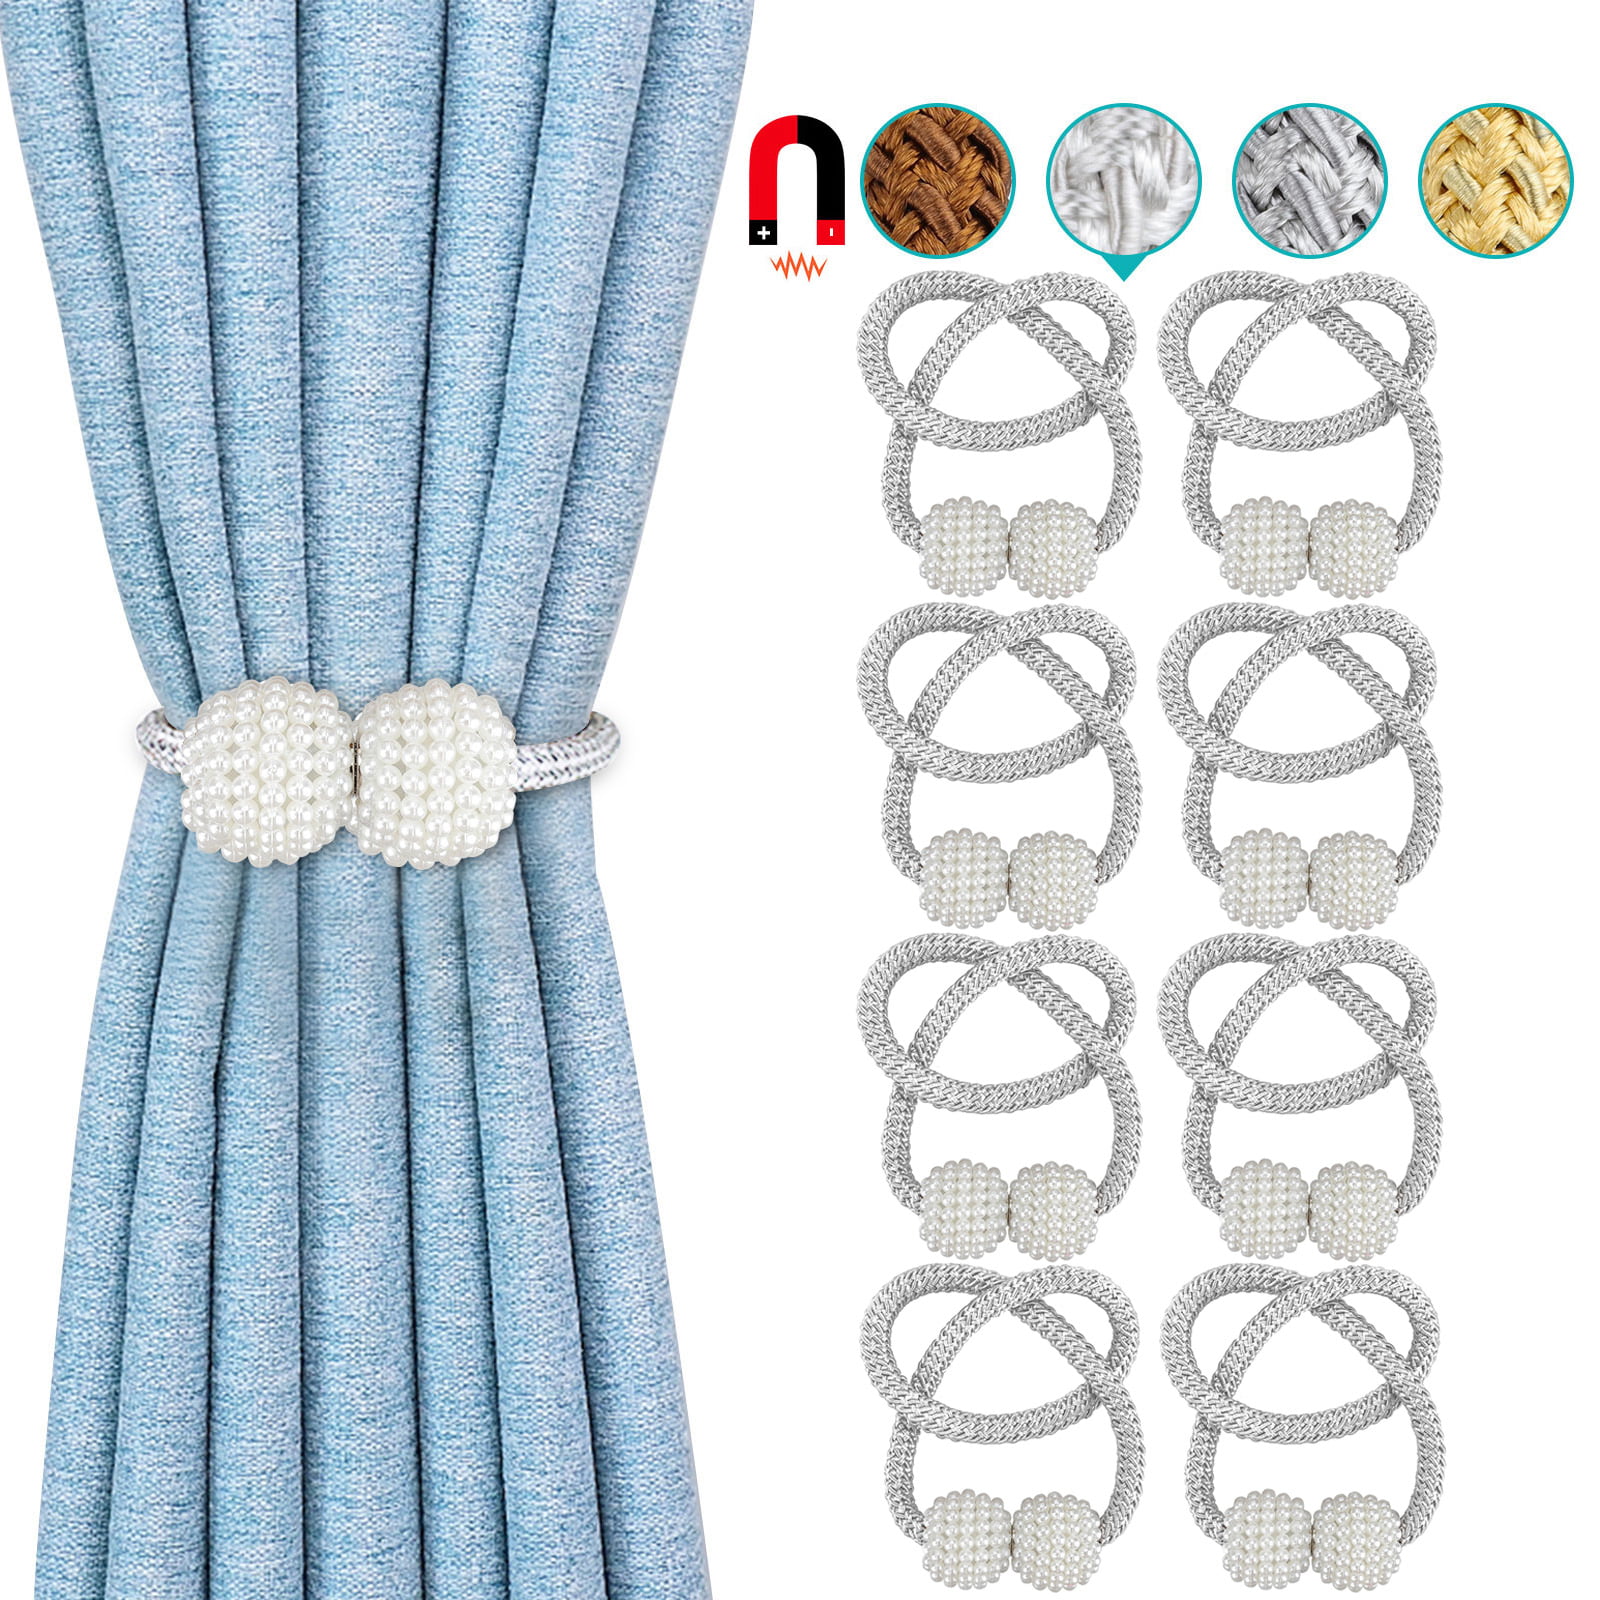 Gold Curtain Tie backs 2 PCS Magnetic Curtain Tiebacks Pearl Ball Curtain Hooks Curtain Holdback Curtain Holder Buckles